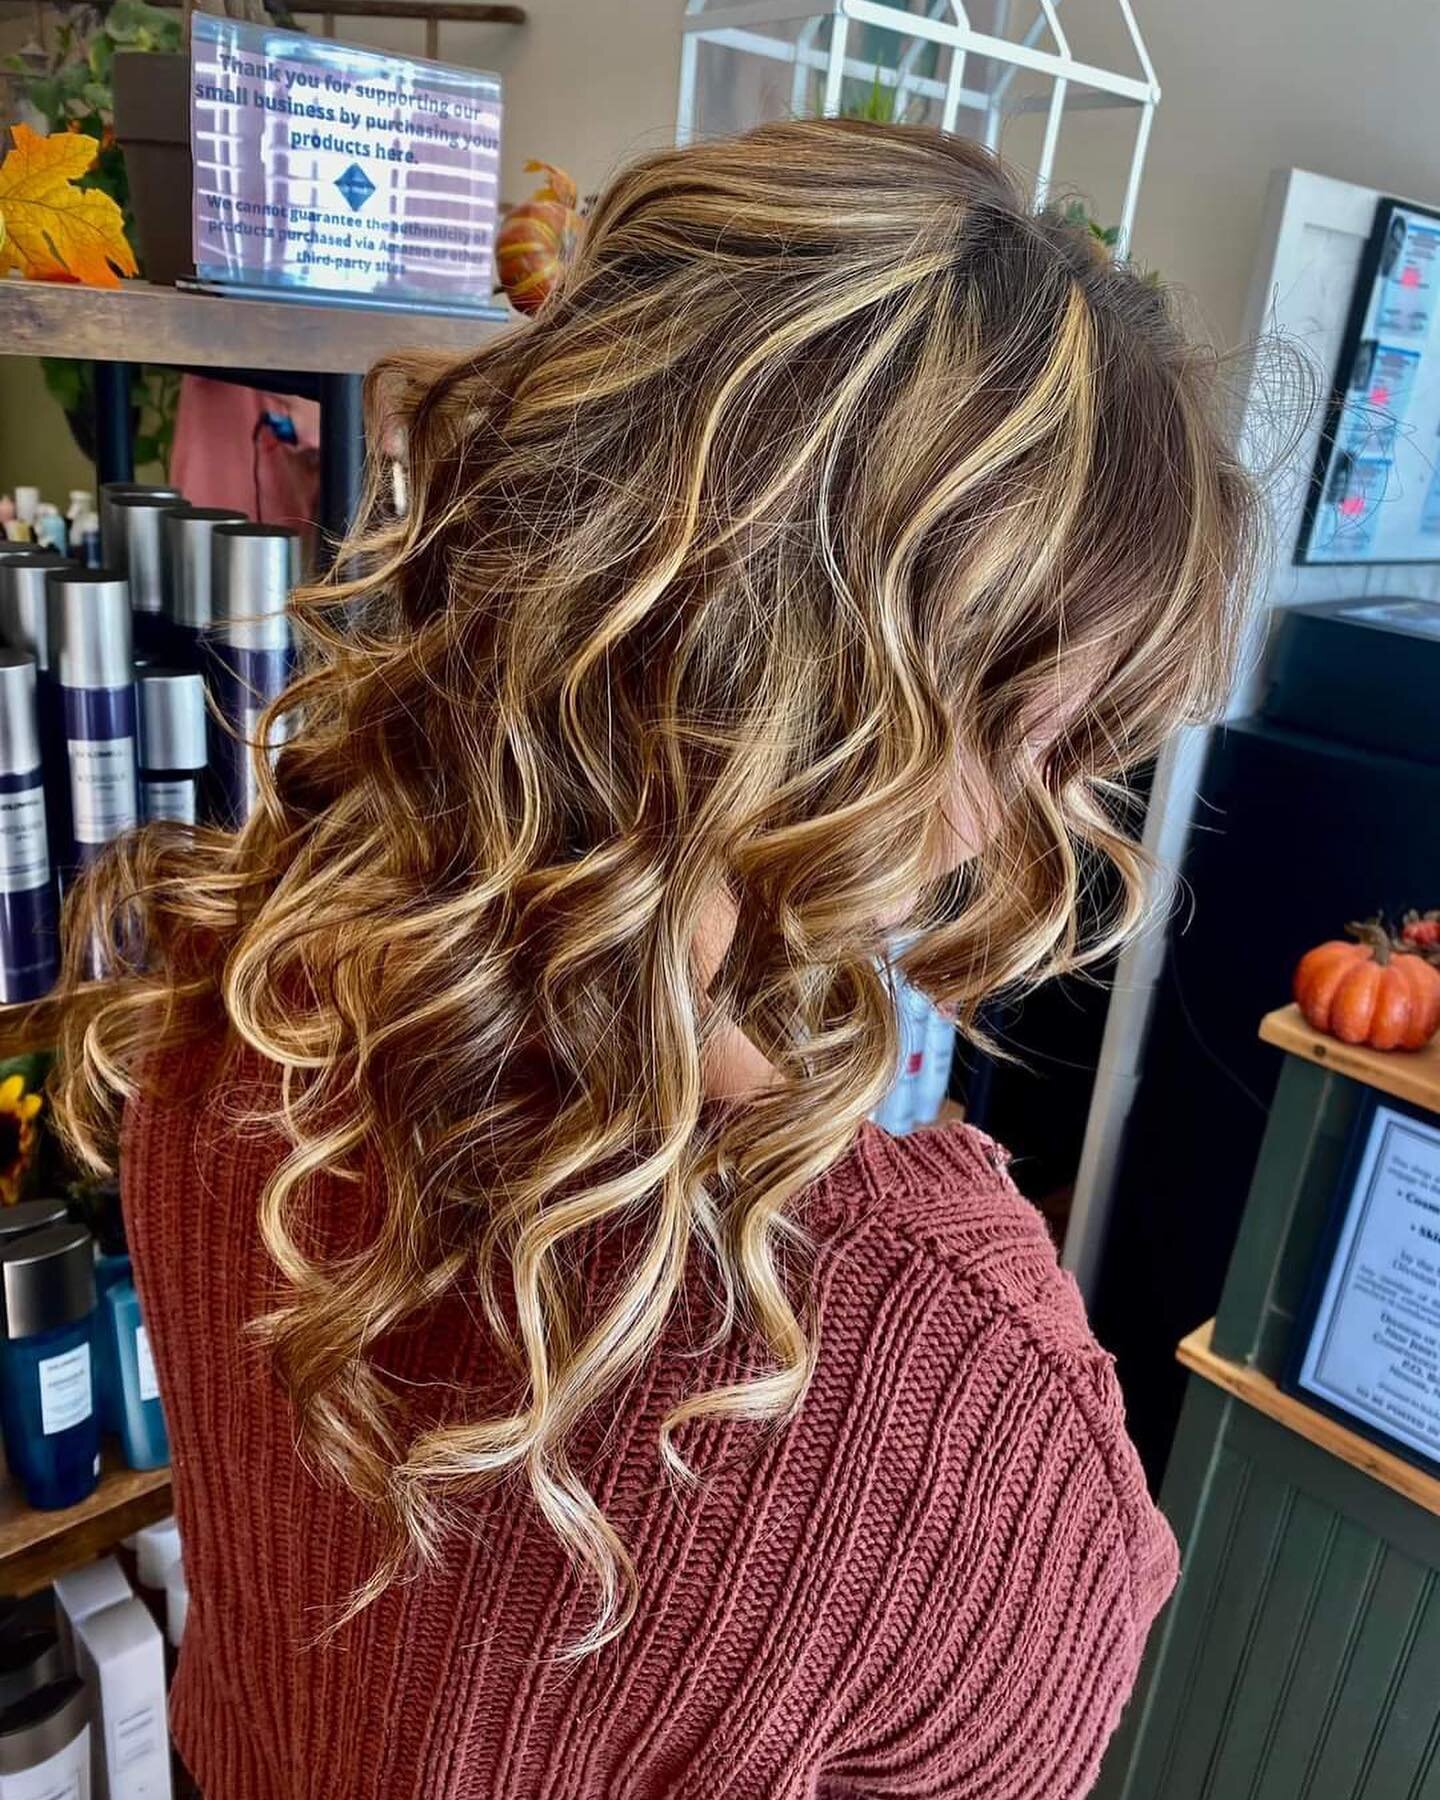 Autumn hair is in the air at Salon Sage
Hair by Ron May

Call us at 856.624.9140 to book your fall makeover 🍁✨

#goldwell #goldwellcolor #goldwellapprovedus #goldwellcolorance #goldwellpurepigments #goldwelltopchic #goldwellsalon #njsalon #njstylist